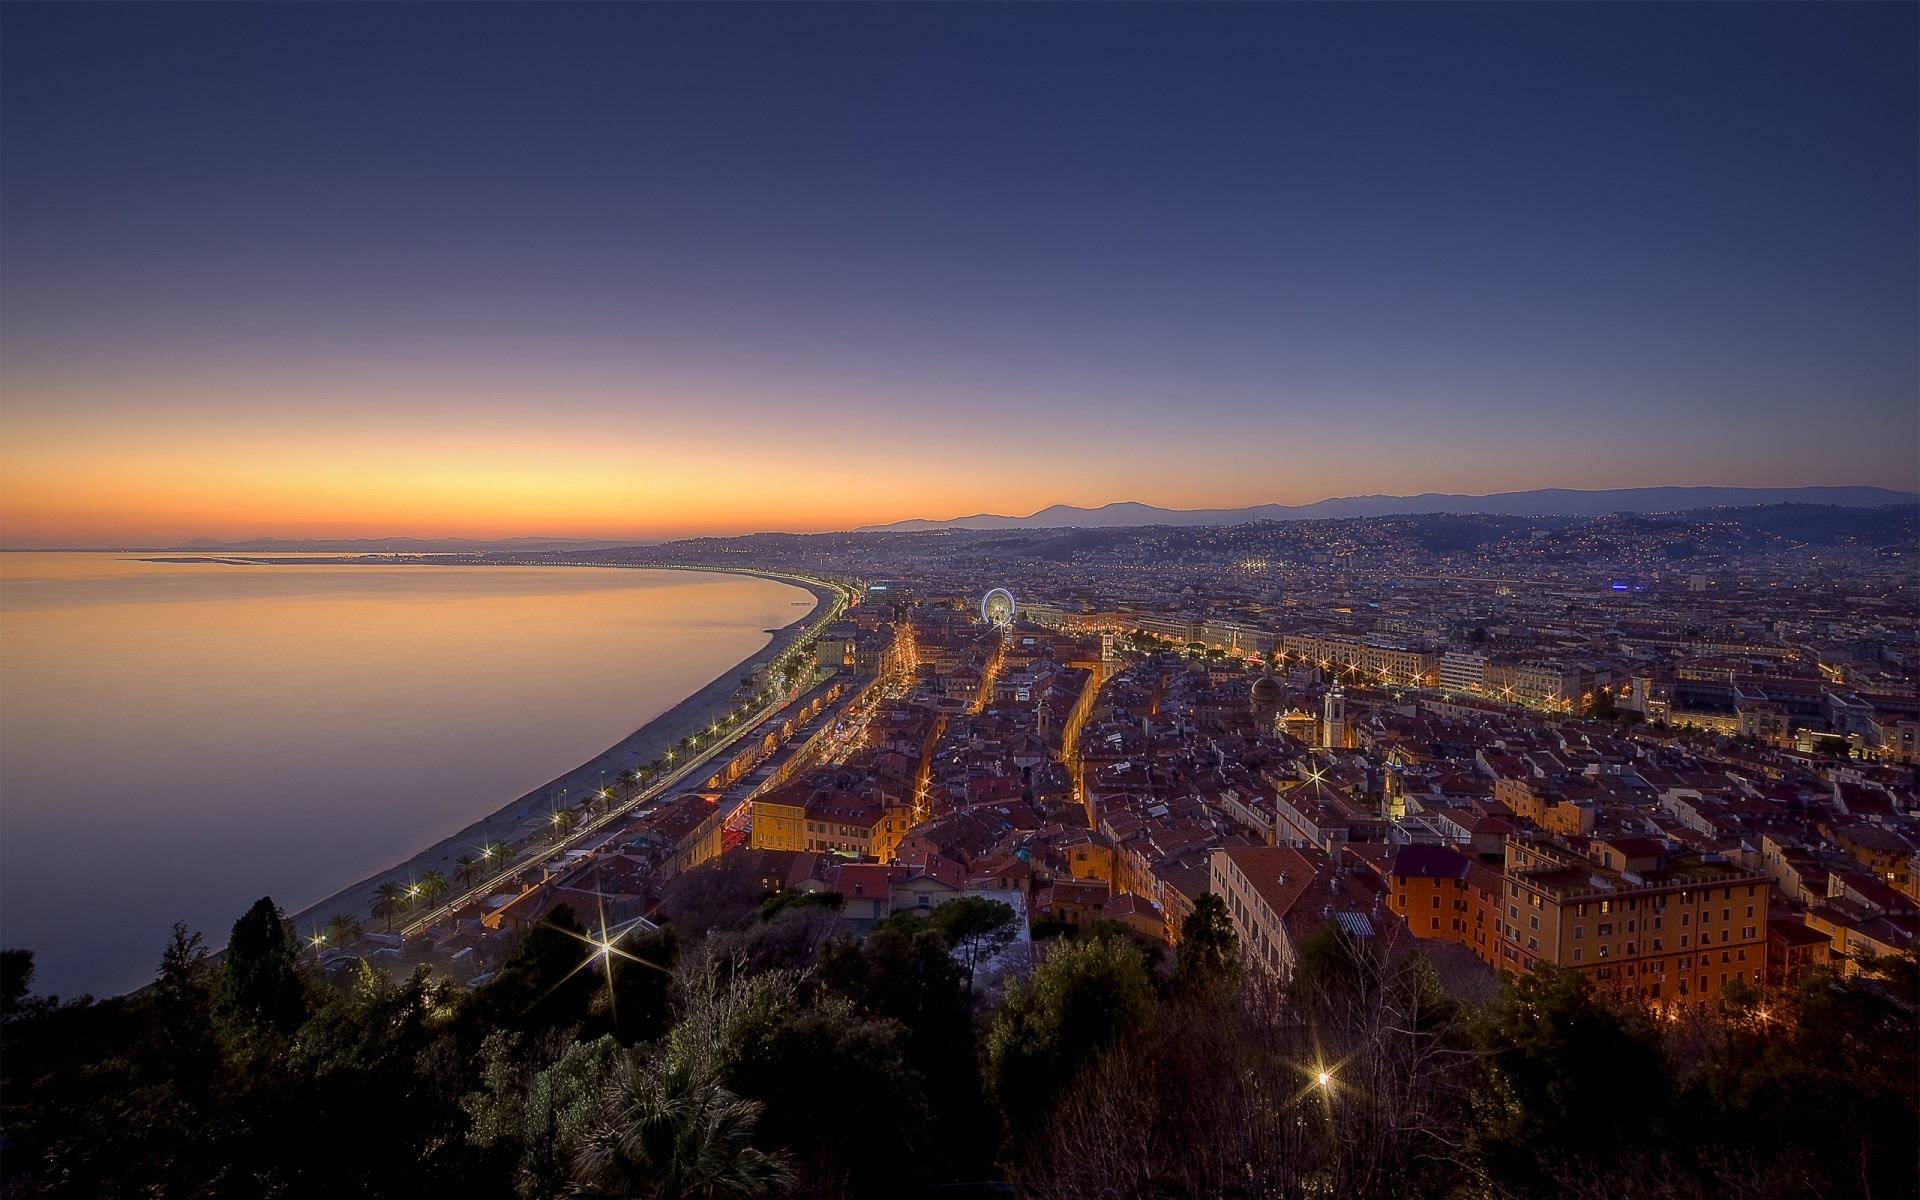 landscapes sunset travel city landscape dusk sky evening water dawn mountain moon outdoors light architecture sea france french riviera high dynamic range lights nice france ocean orange park du chateau photography